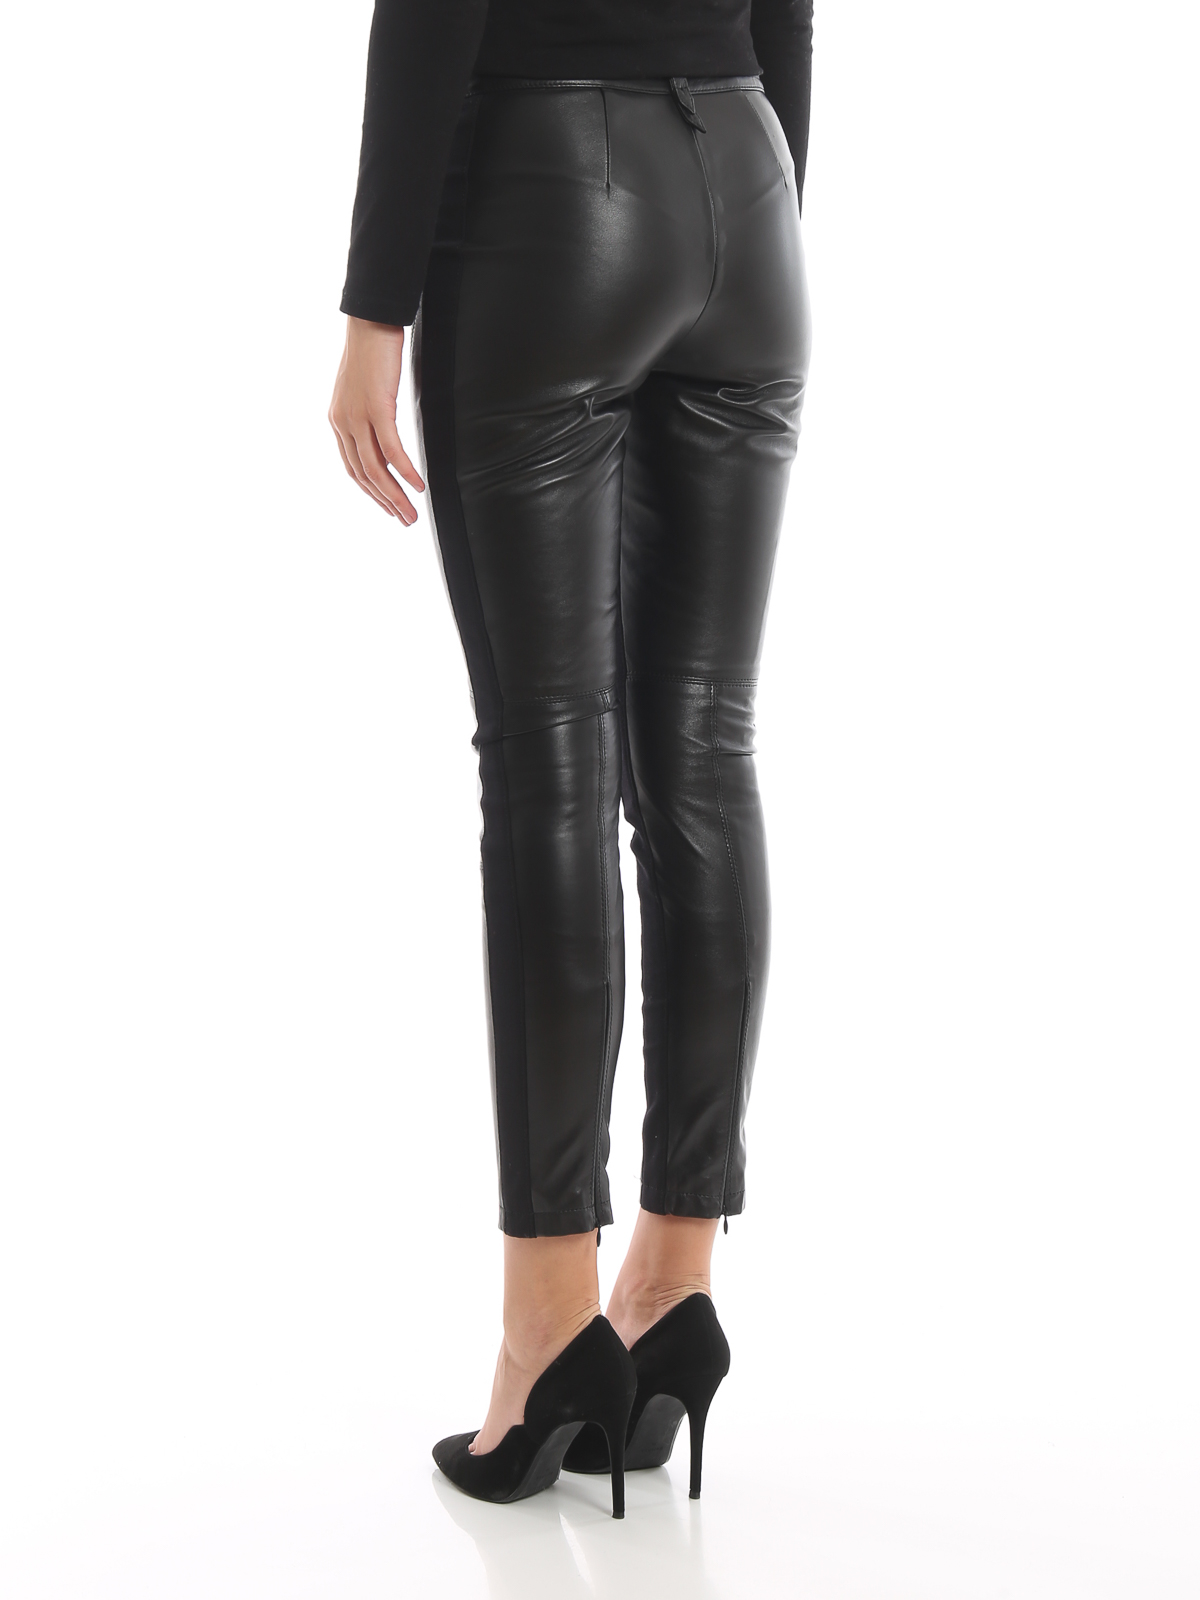 Butberri Leather Pants For Winter Stretch Fit Leather Leggings Fleece Lined  | Buy Online in South Africa | takealot.com